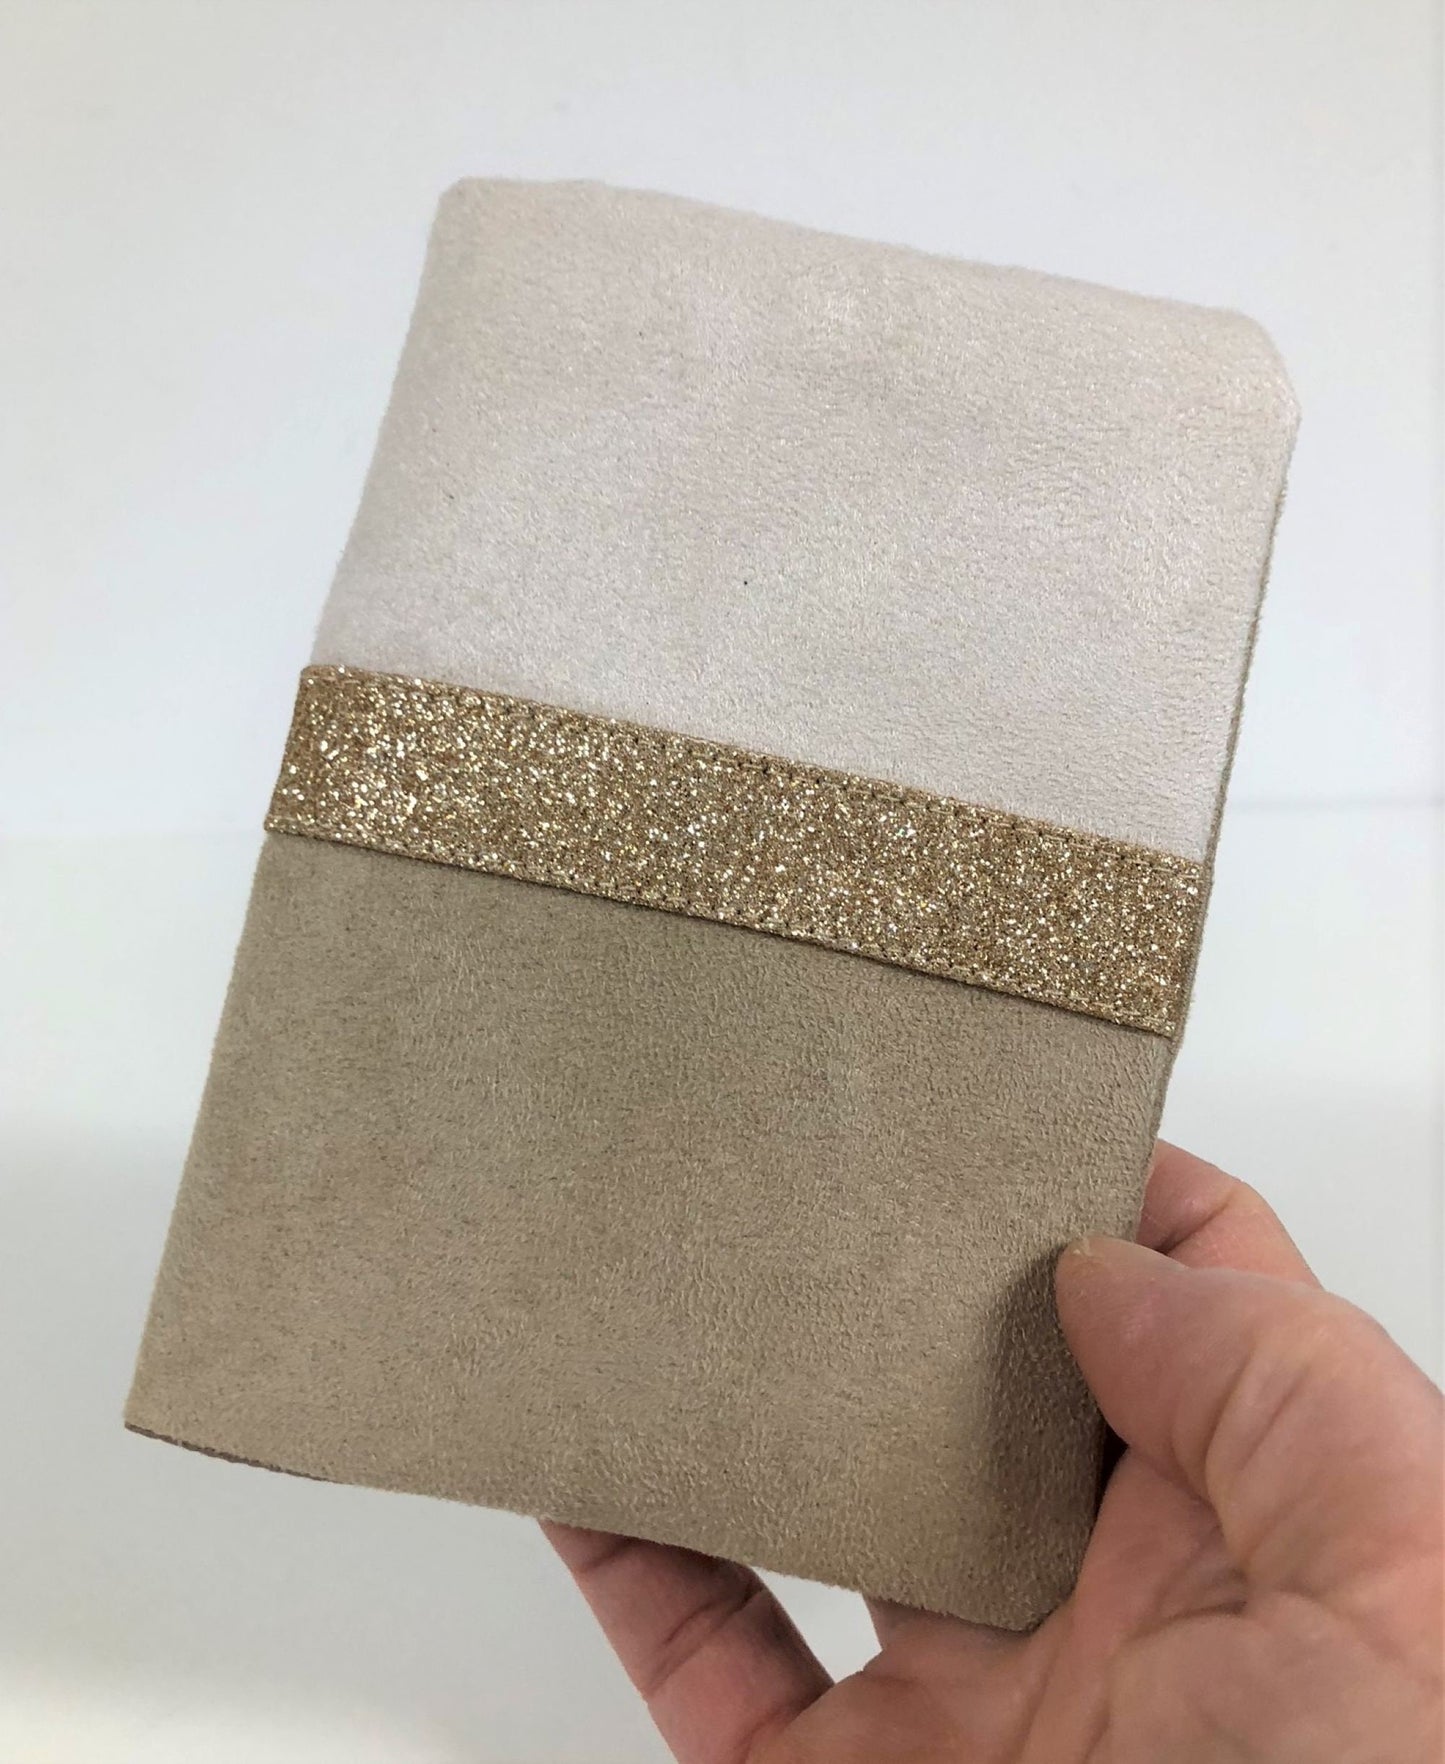 Ecru and beige passport cover with gold sequins